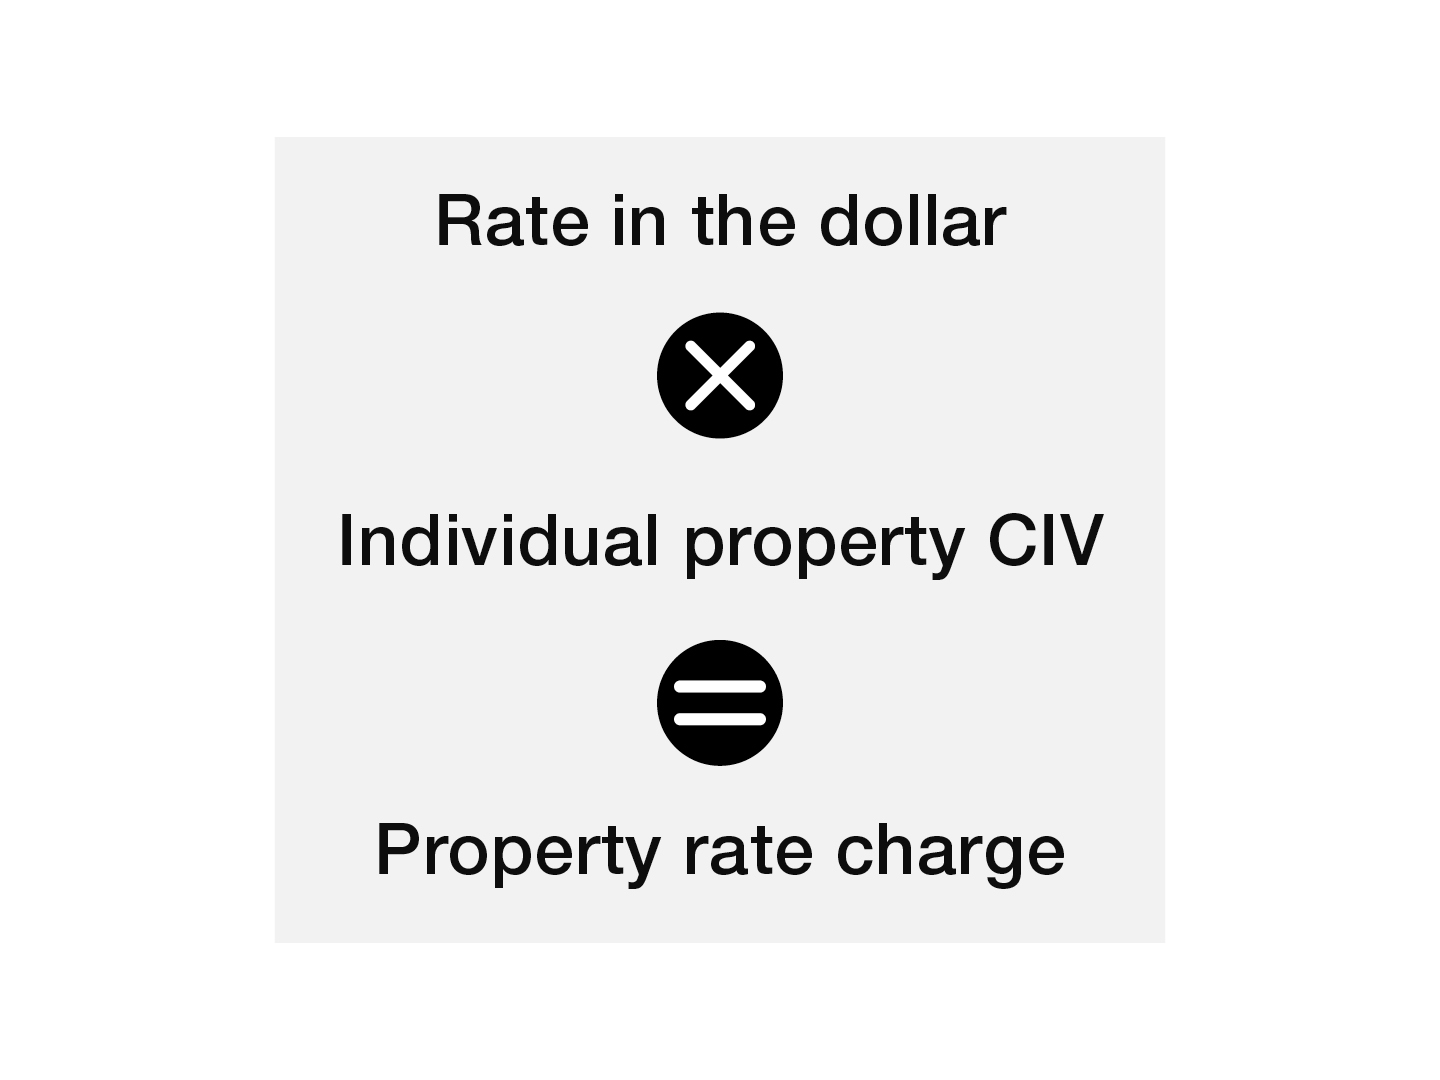 Rate in the dollar multiplied by the Individual property CIV equals the property rate charge